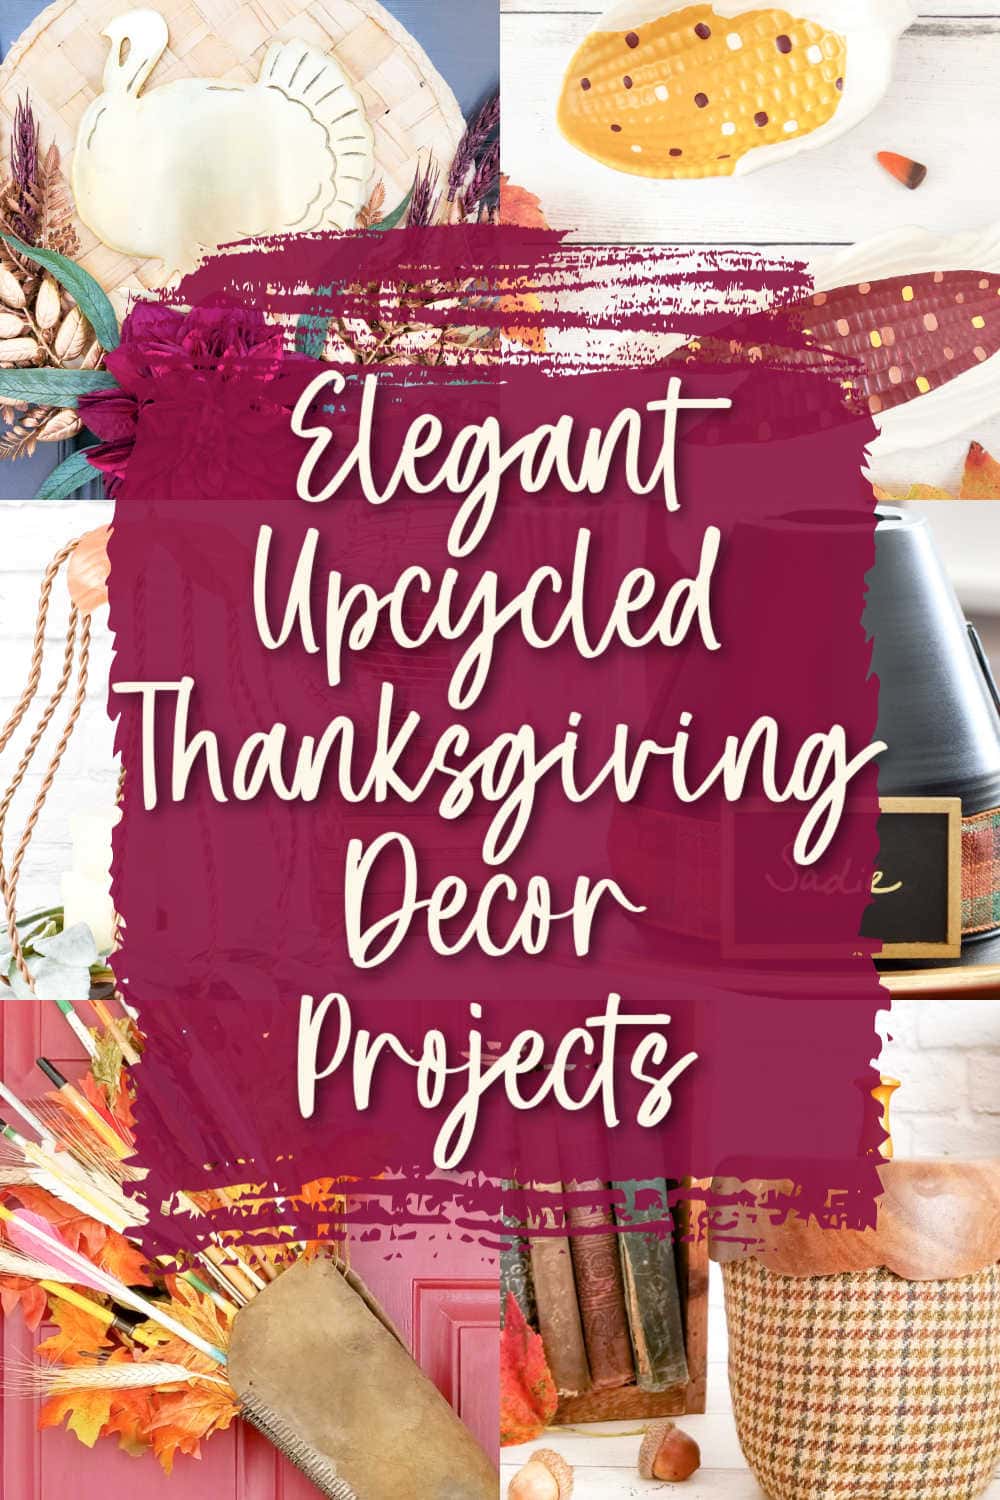 upcycle ideas for thanksgiving that are chic and elegant